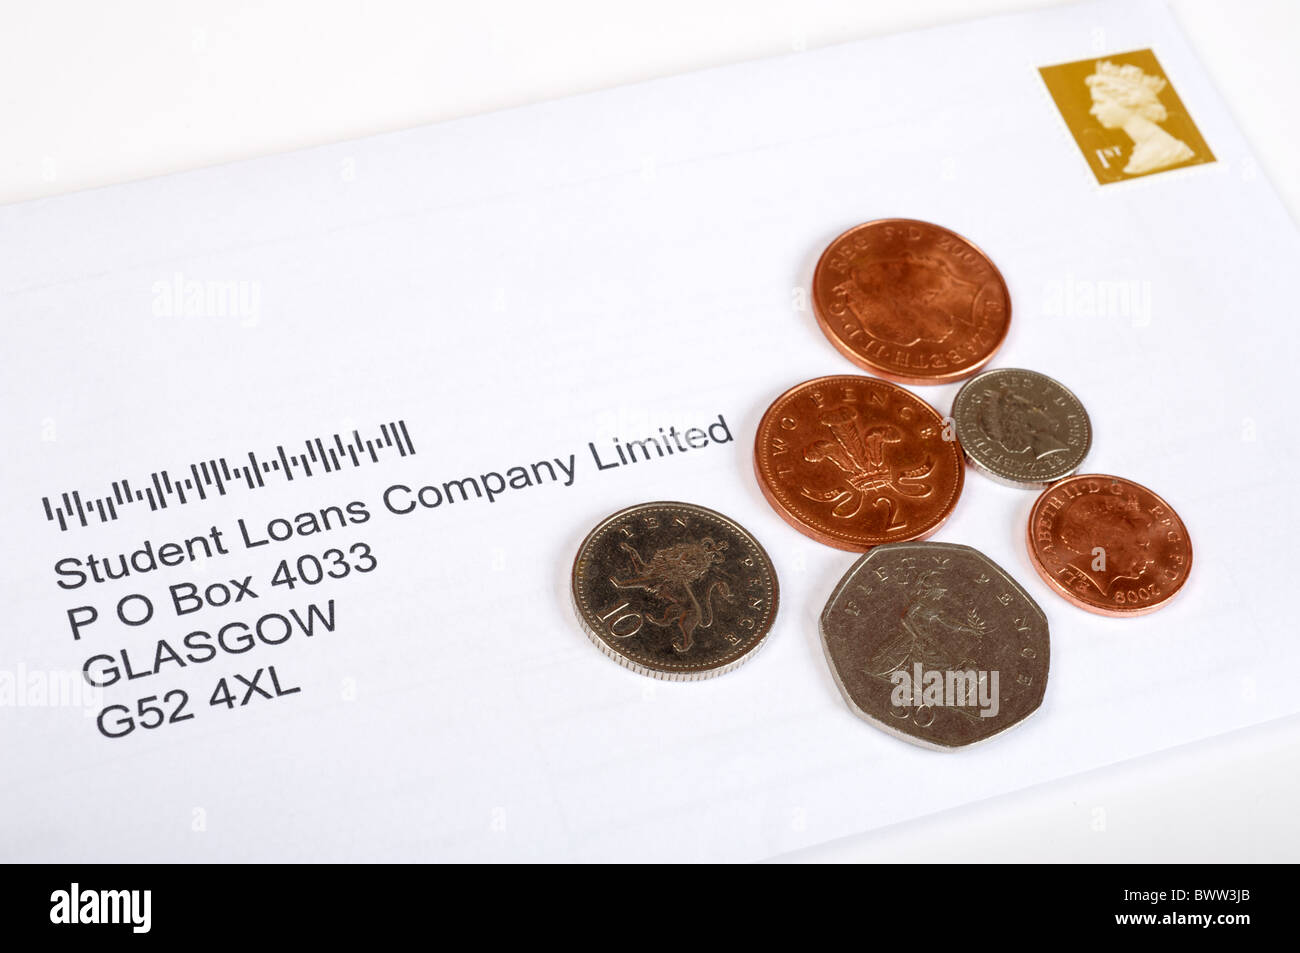 Letter with coins addressed to the Student Loans Company Stock Photo